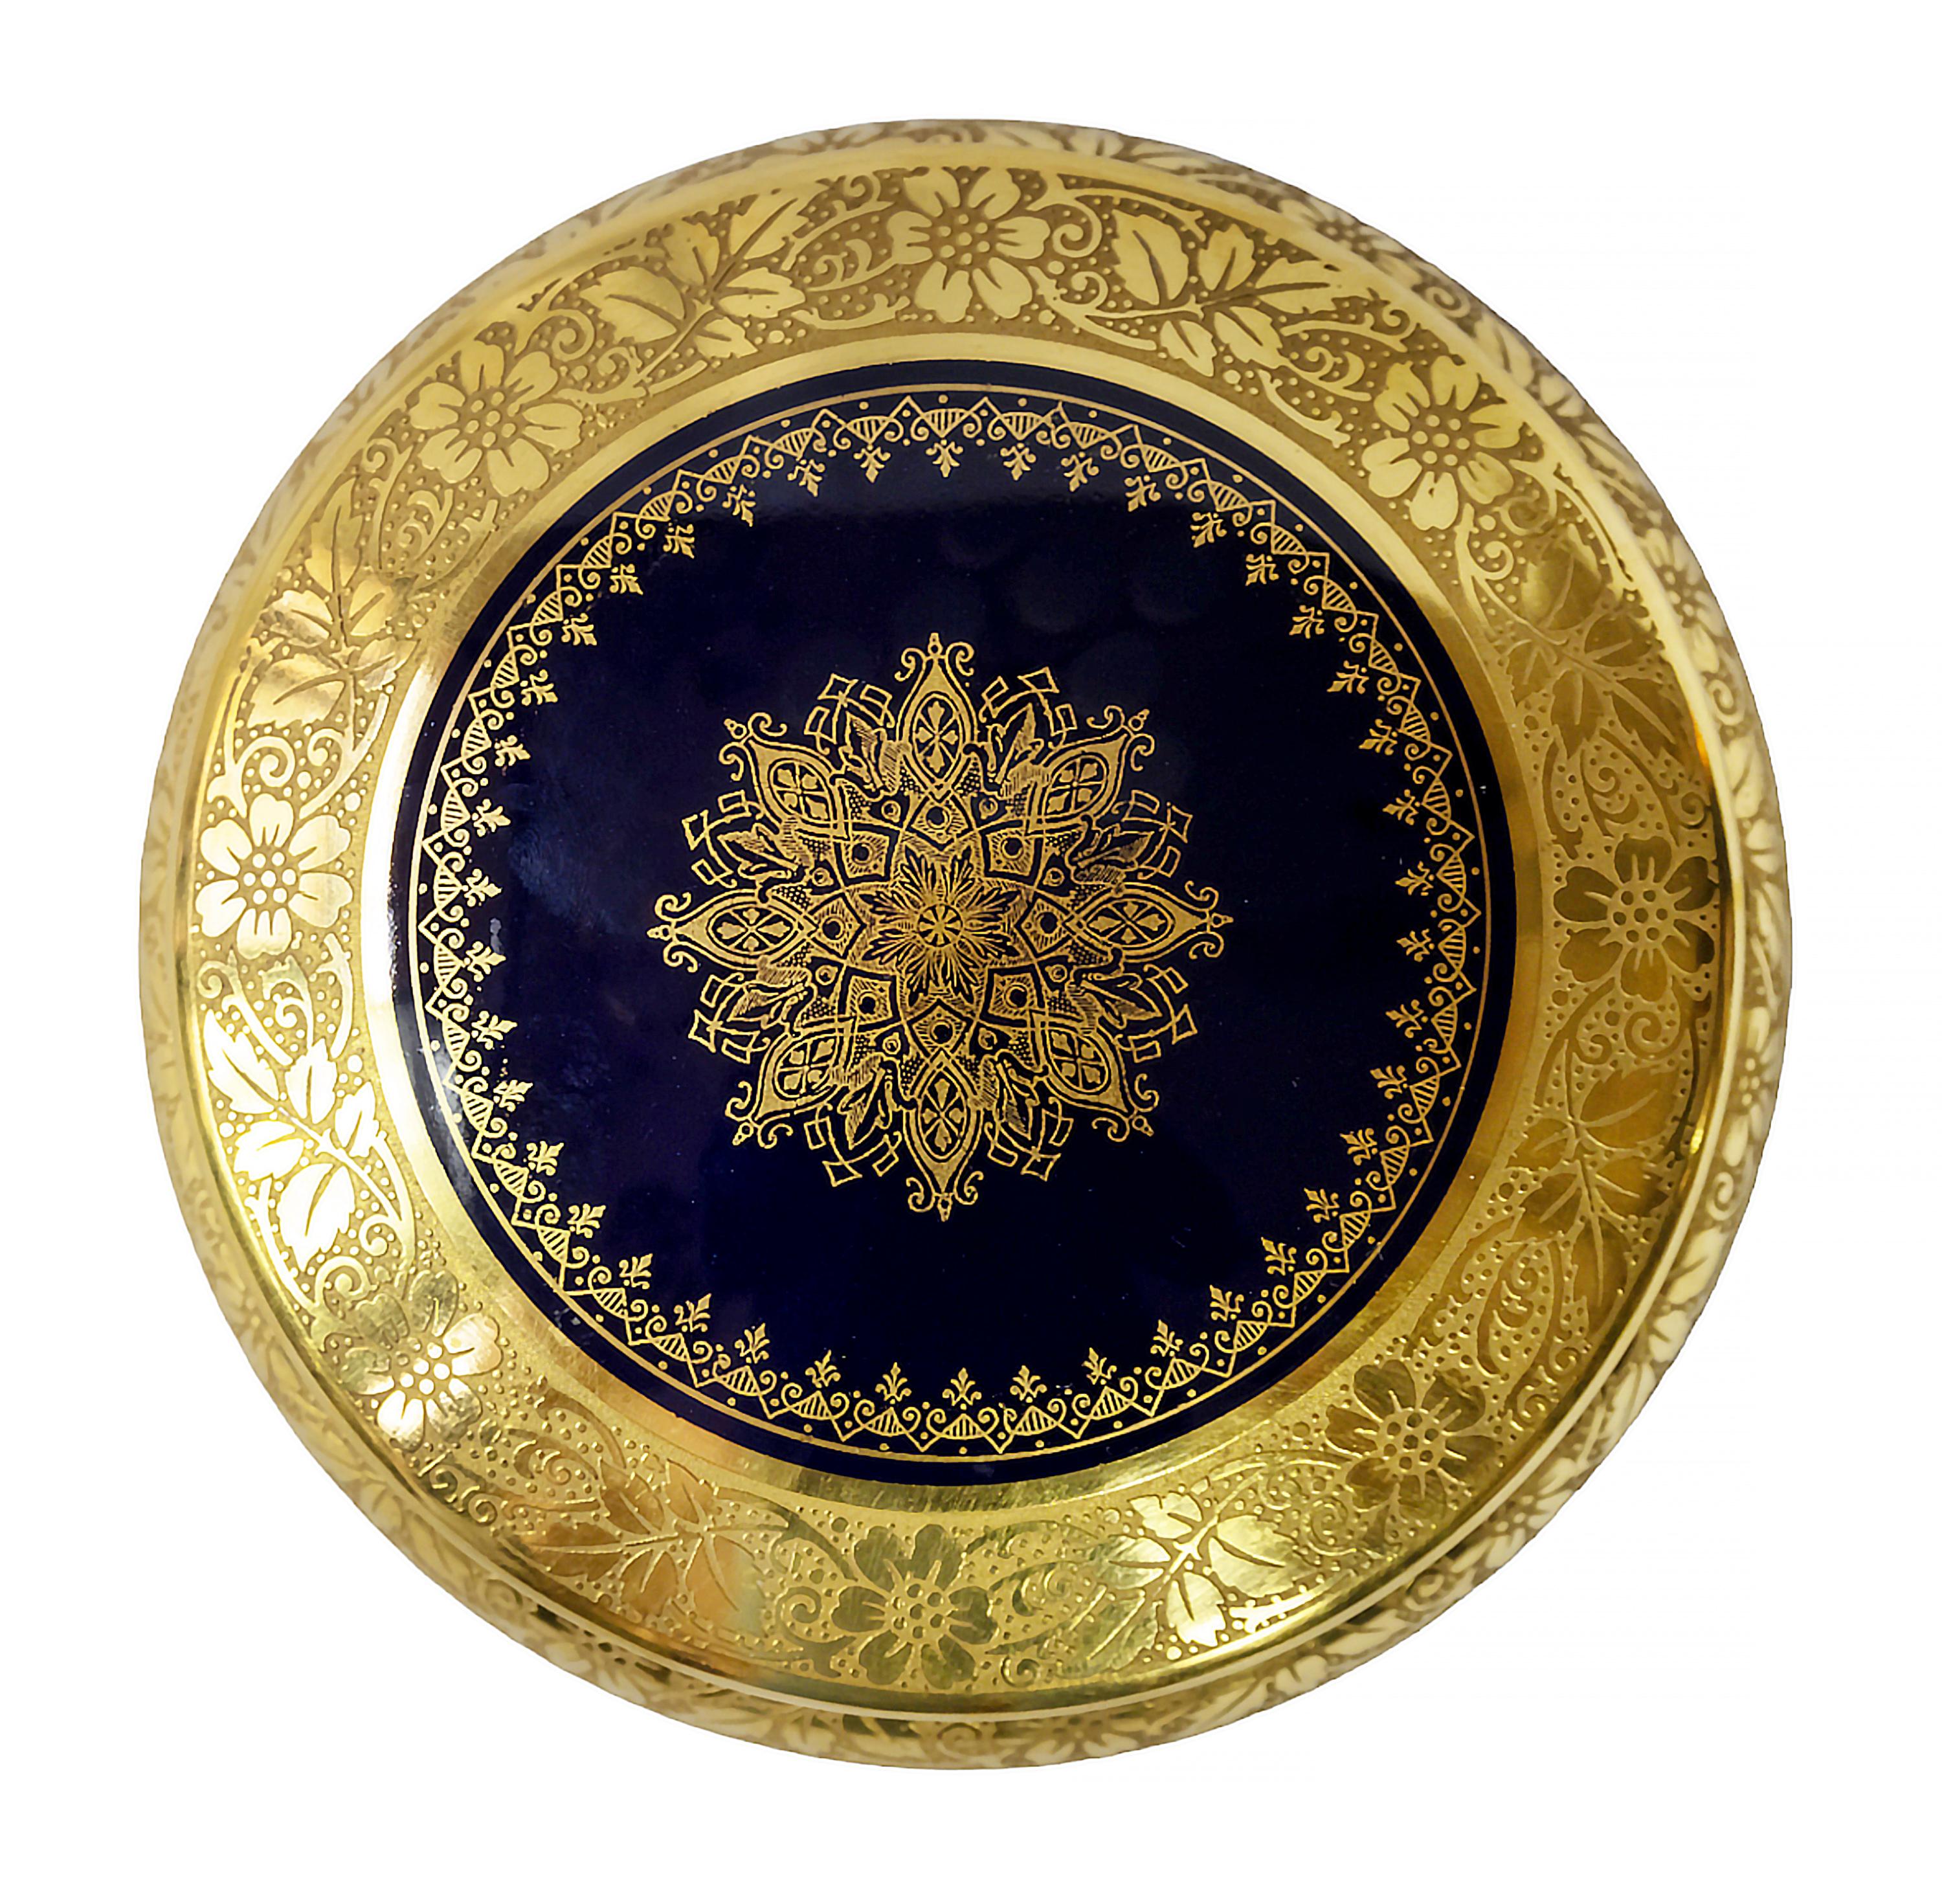 Cobalt blue porcelain jewelry box richly decorated with gold decor produced by Limoges France.
Marked on the bottom.